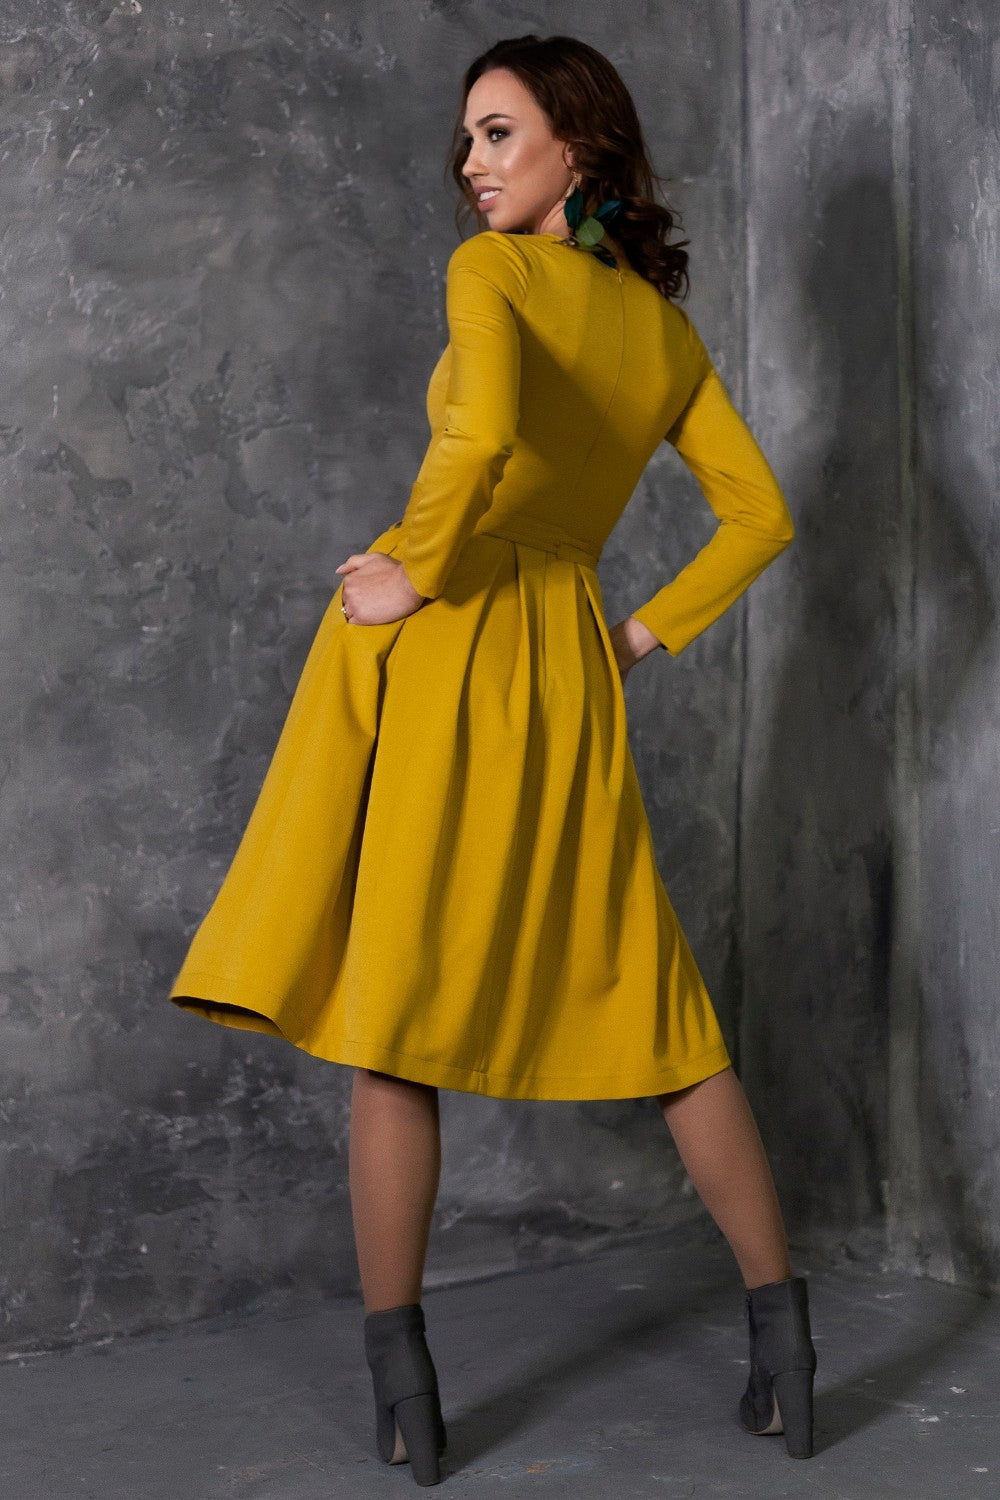 Full dress with side pockets